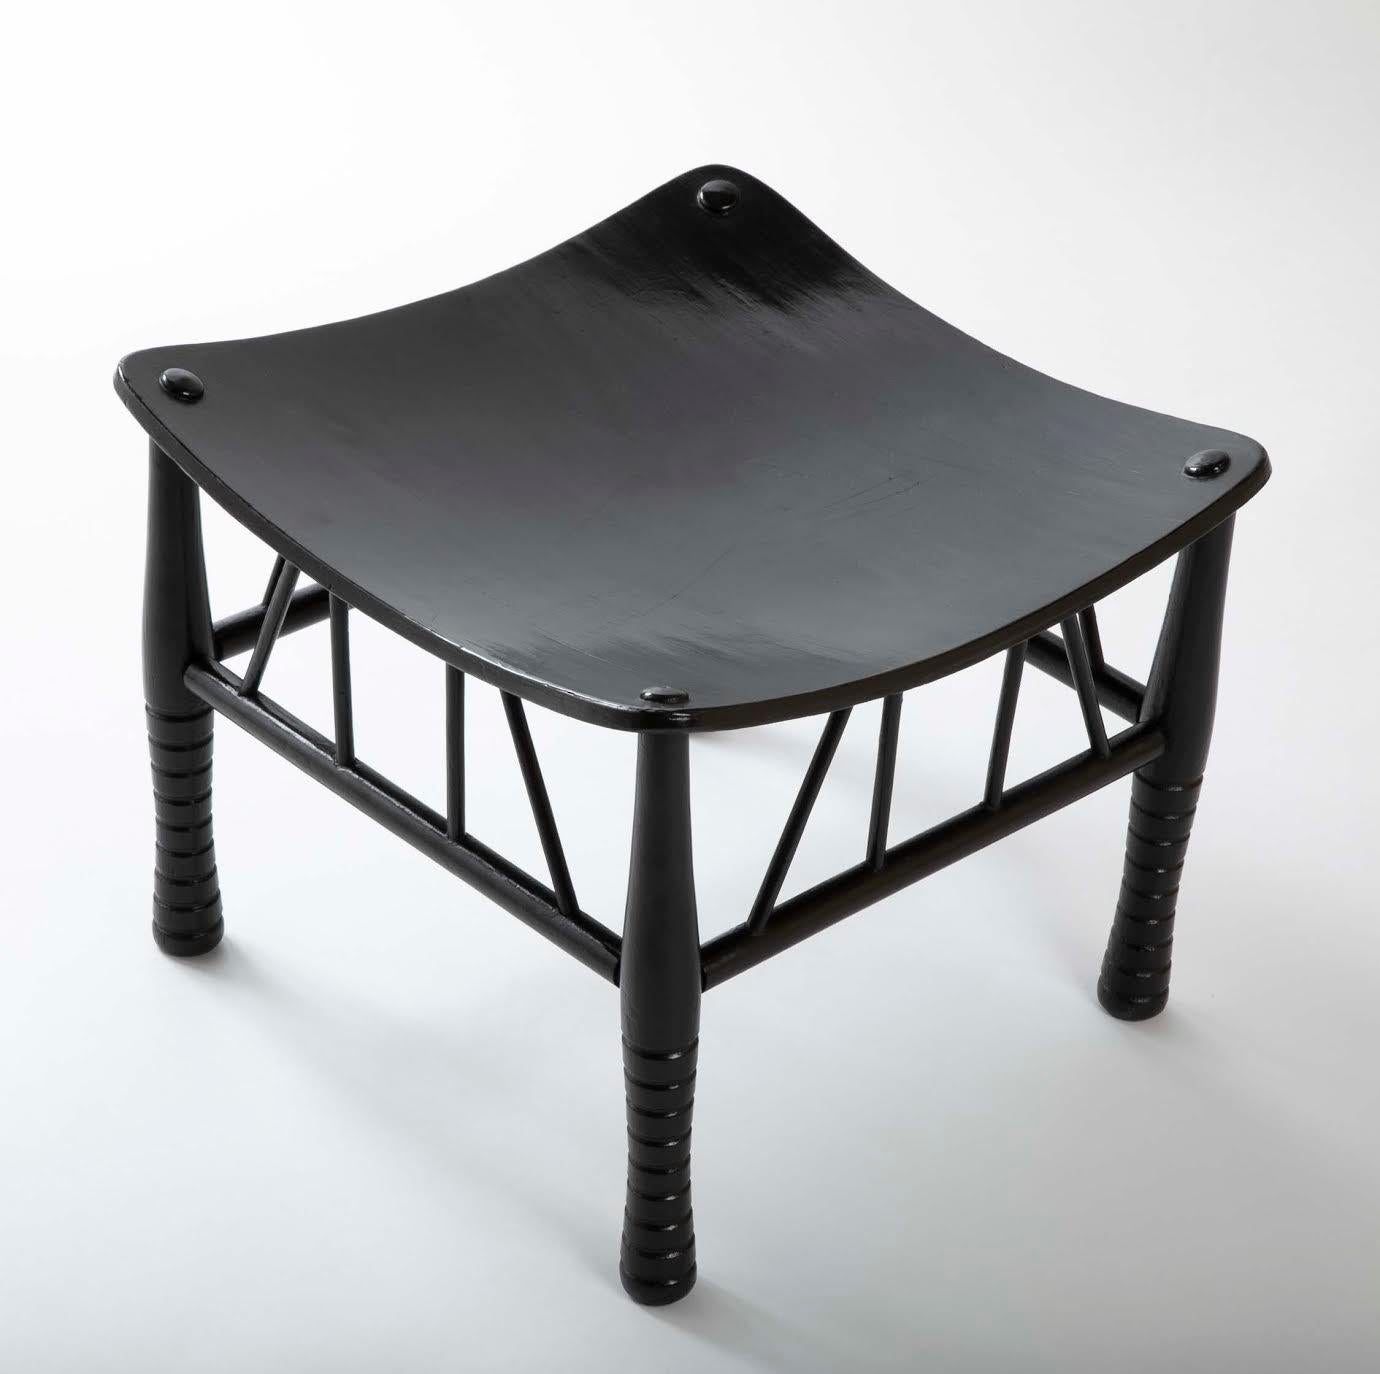 19th century English Thebes stool with ebonized lacquer finish, the solid seat supported by four turned legs united by stretchers. A fine example of the form, unusual in it's rich black surface. The original Egyptian Thebes stool dates back to the